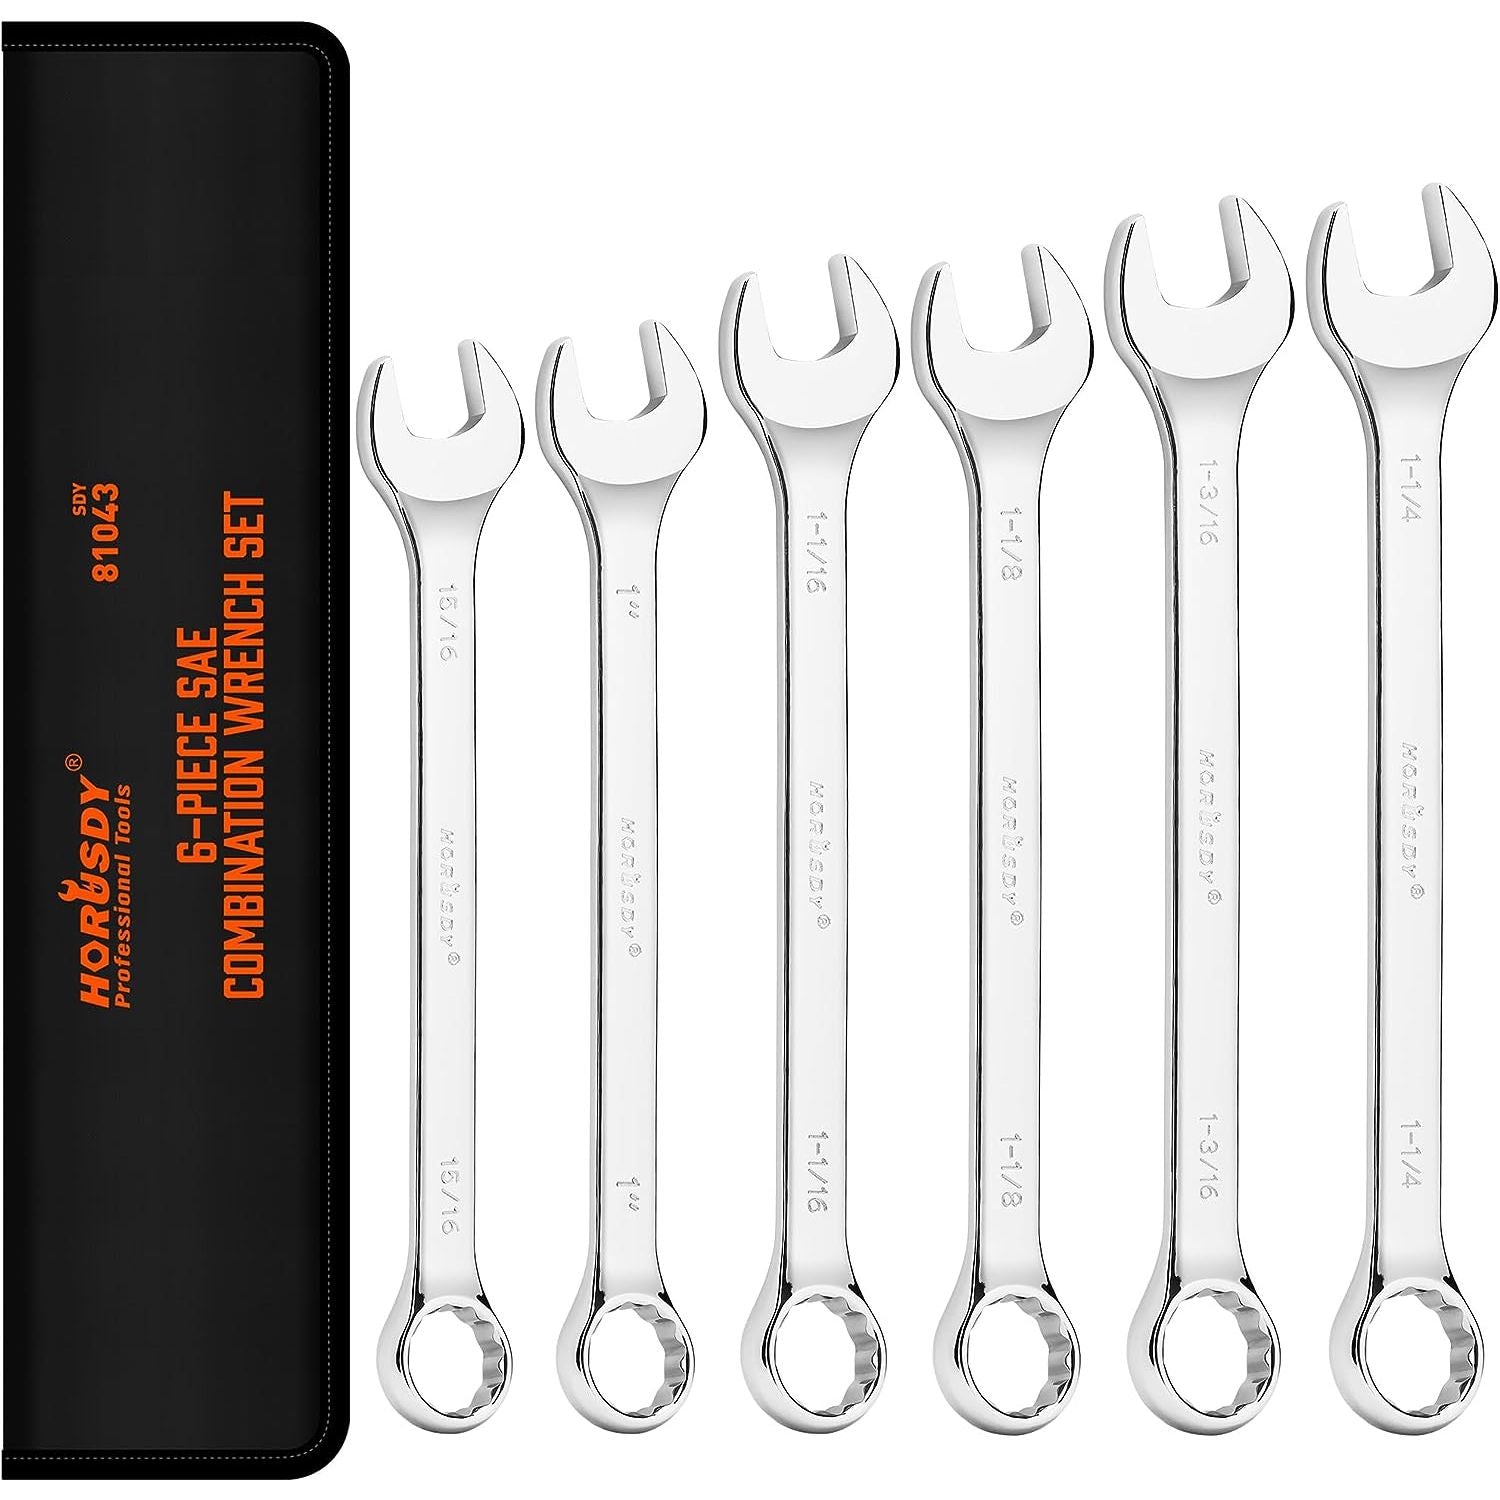 Large Wrench 6 Piece Set | 12 Point | 15/16″, 1″, 1-1/16″, 1-1/8″, 1-3/16″, 1-1/4″ - South East Clearance Centre